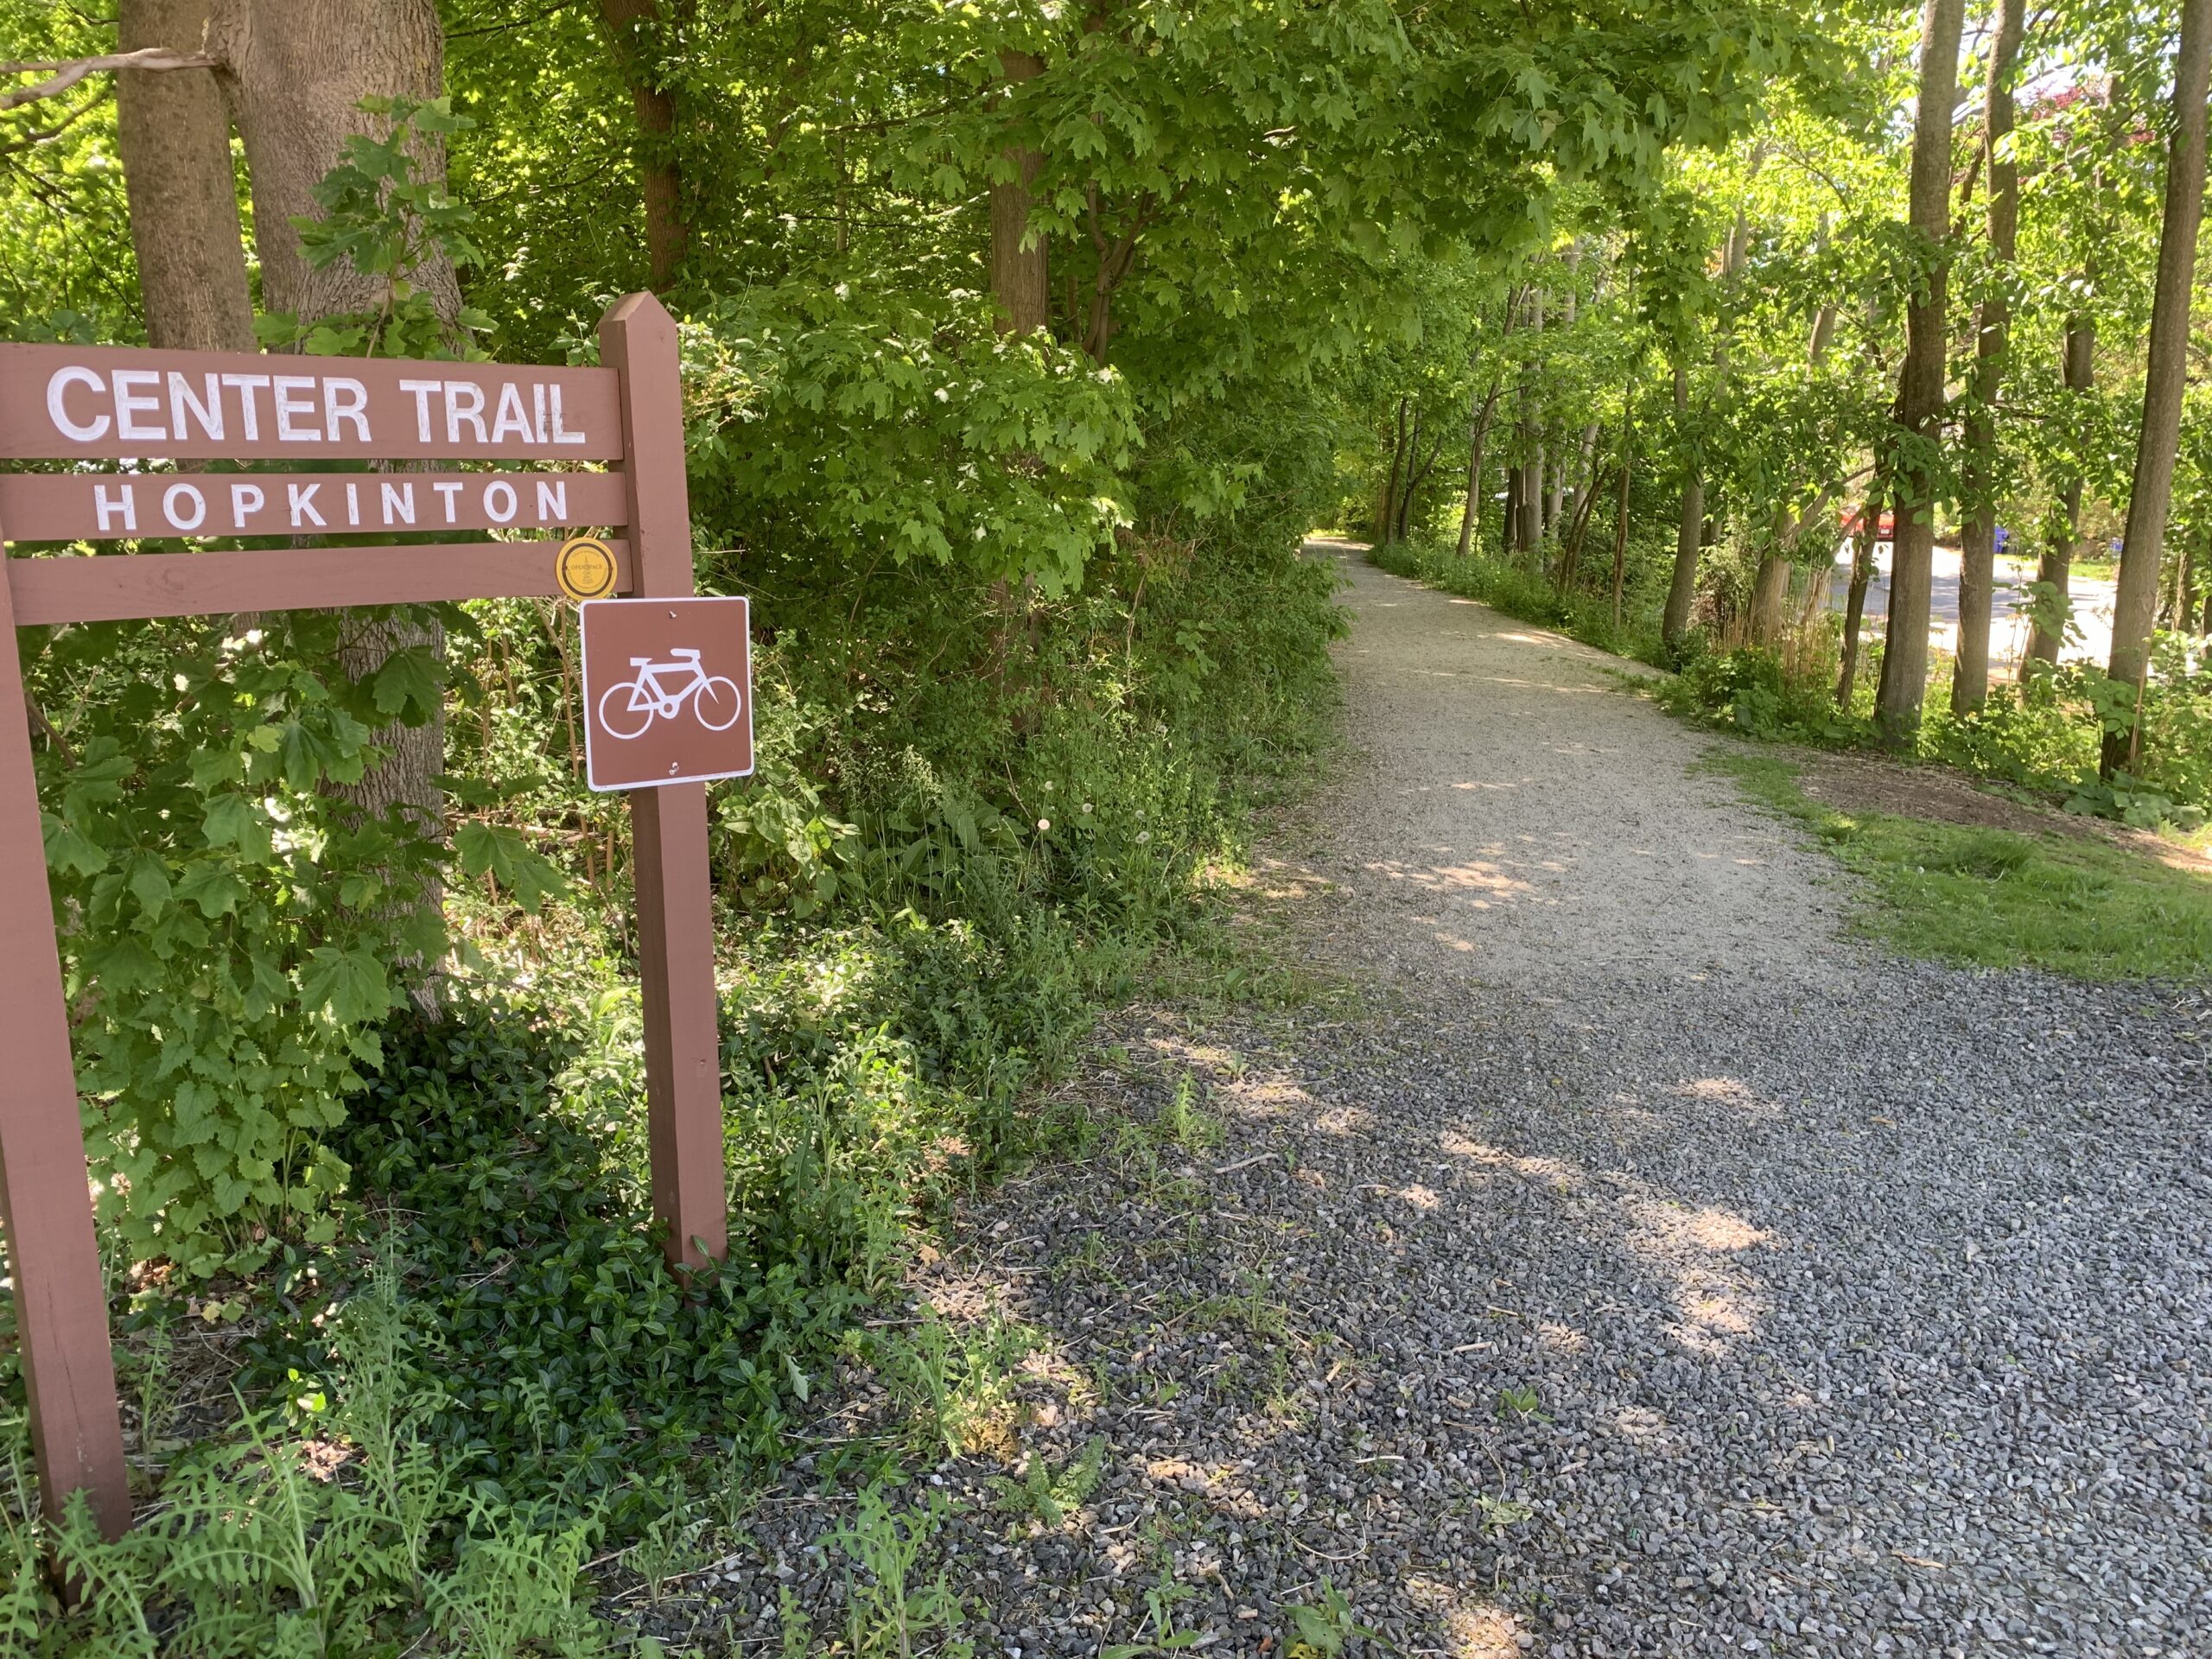 Upper Charles Trail Committee discusses next steps, including public outreach